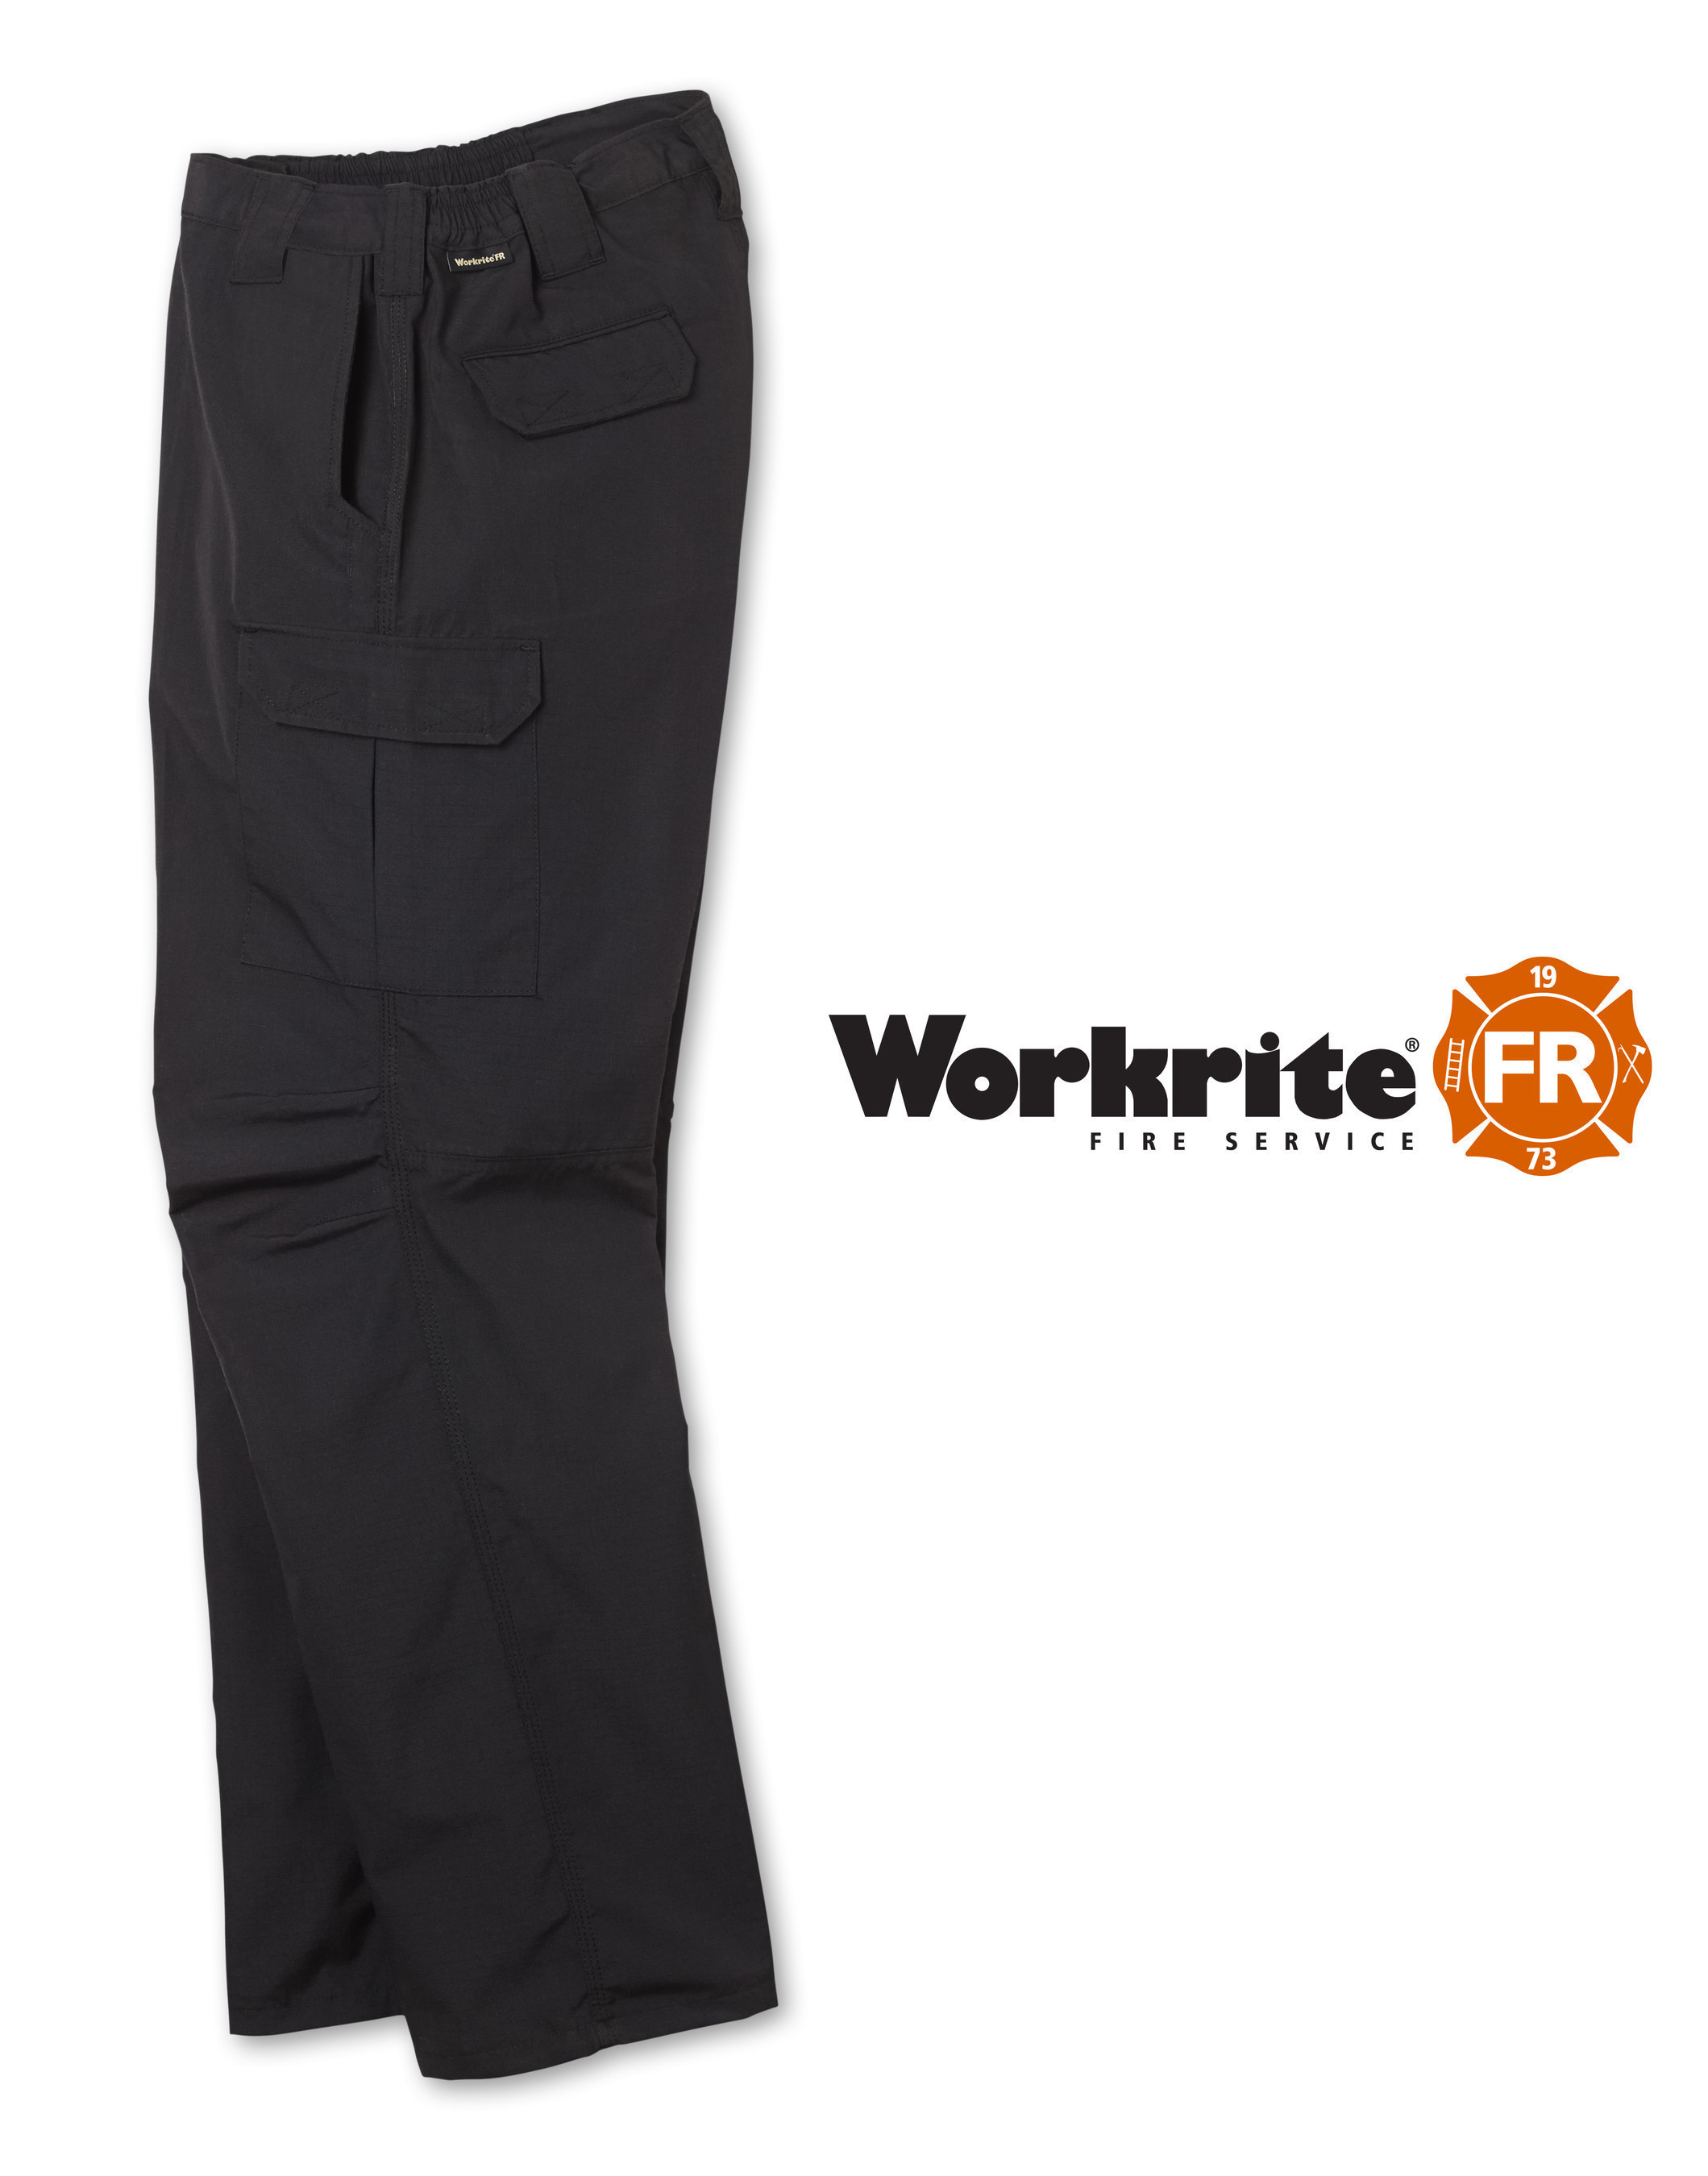 The Workrite(R) FR Tactical Pant: a durable, lightweight and stylish FR clothing option for firefighters and industrial workers.